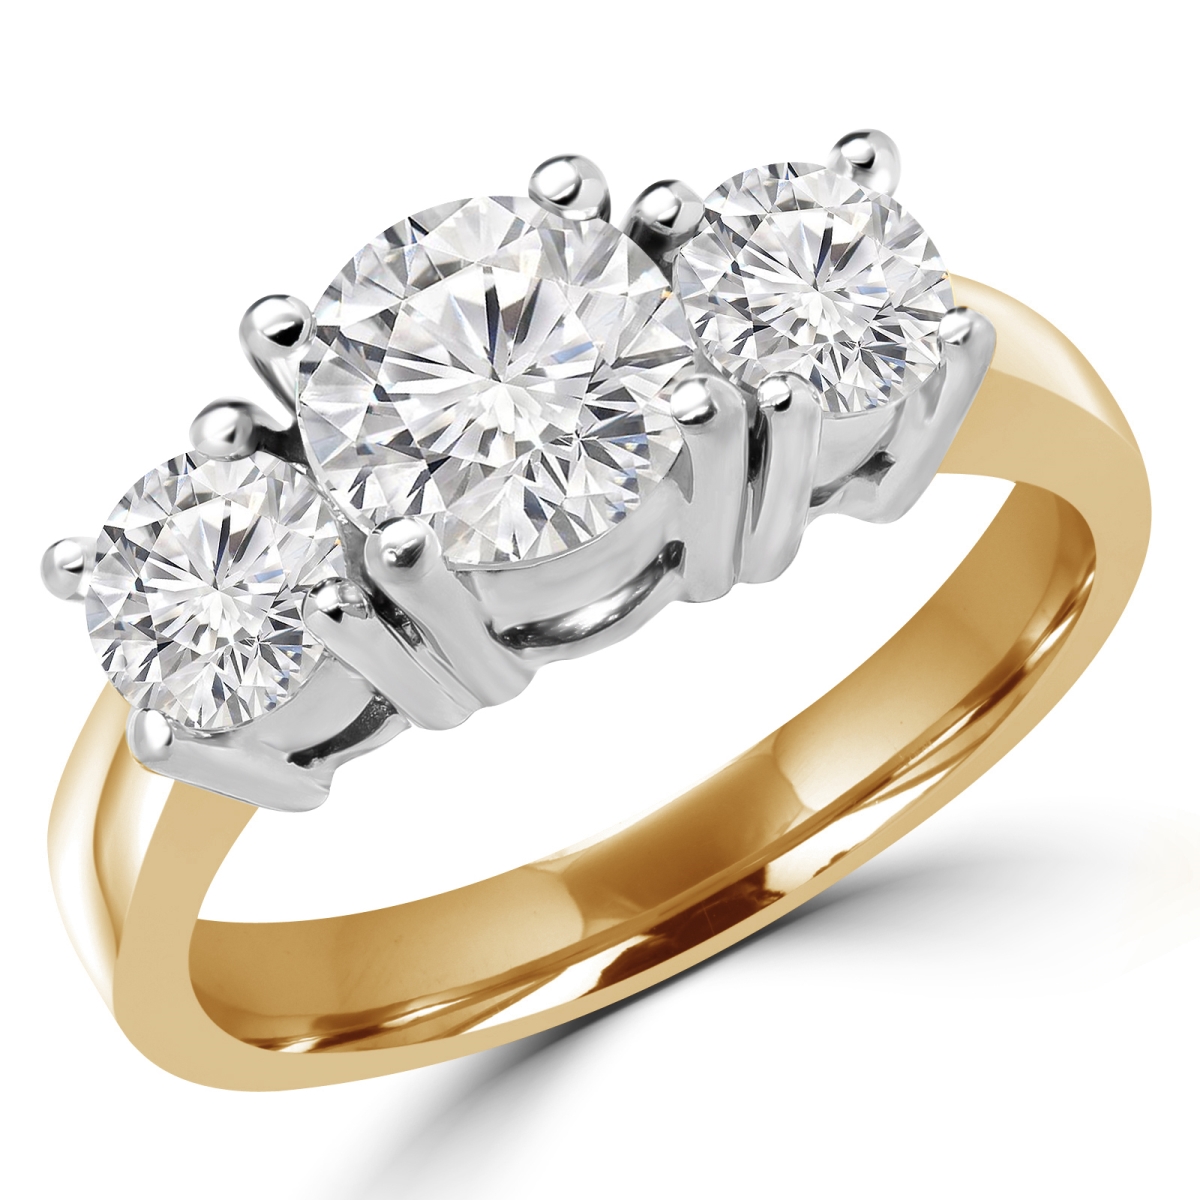 Picture of Majesty Diamonds MD170091-3.25 1.1 CTW Round Diamond Three-Stone Engagement Ring in 14K Yellow Gold - Size 3.25